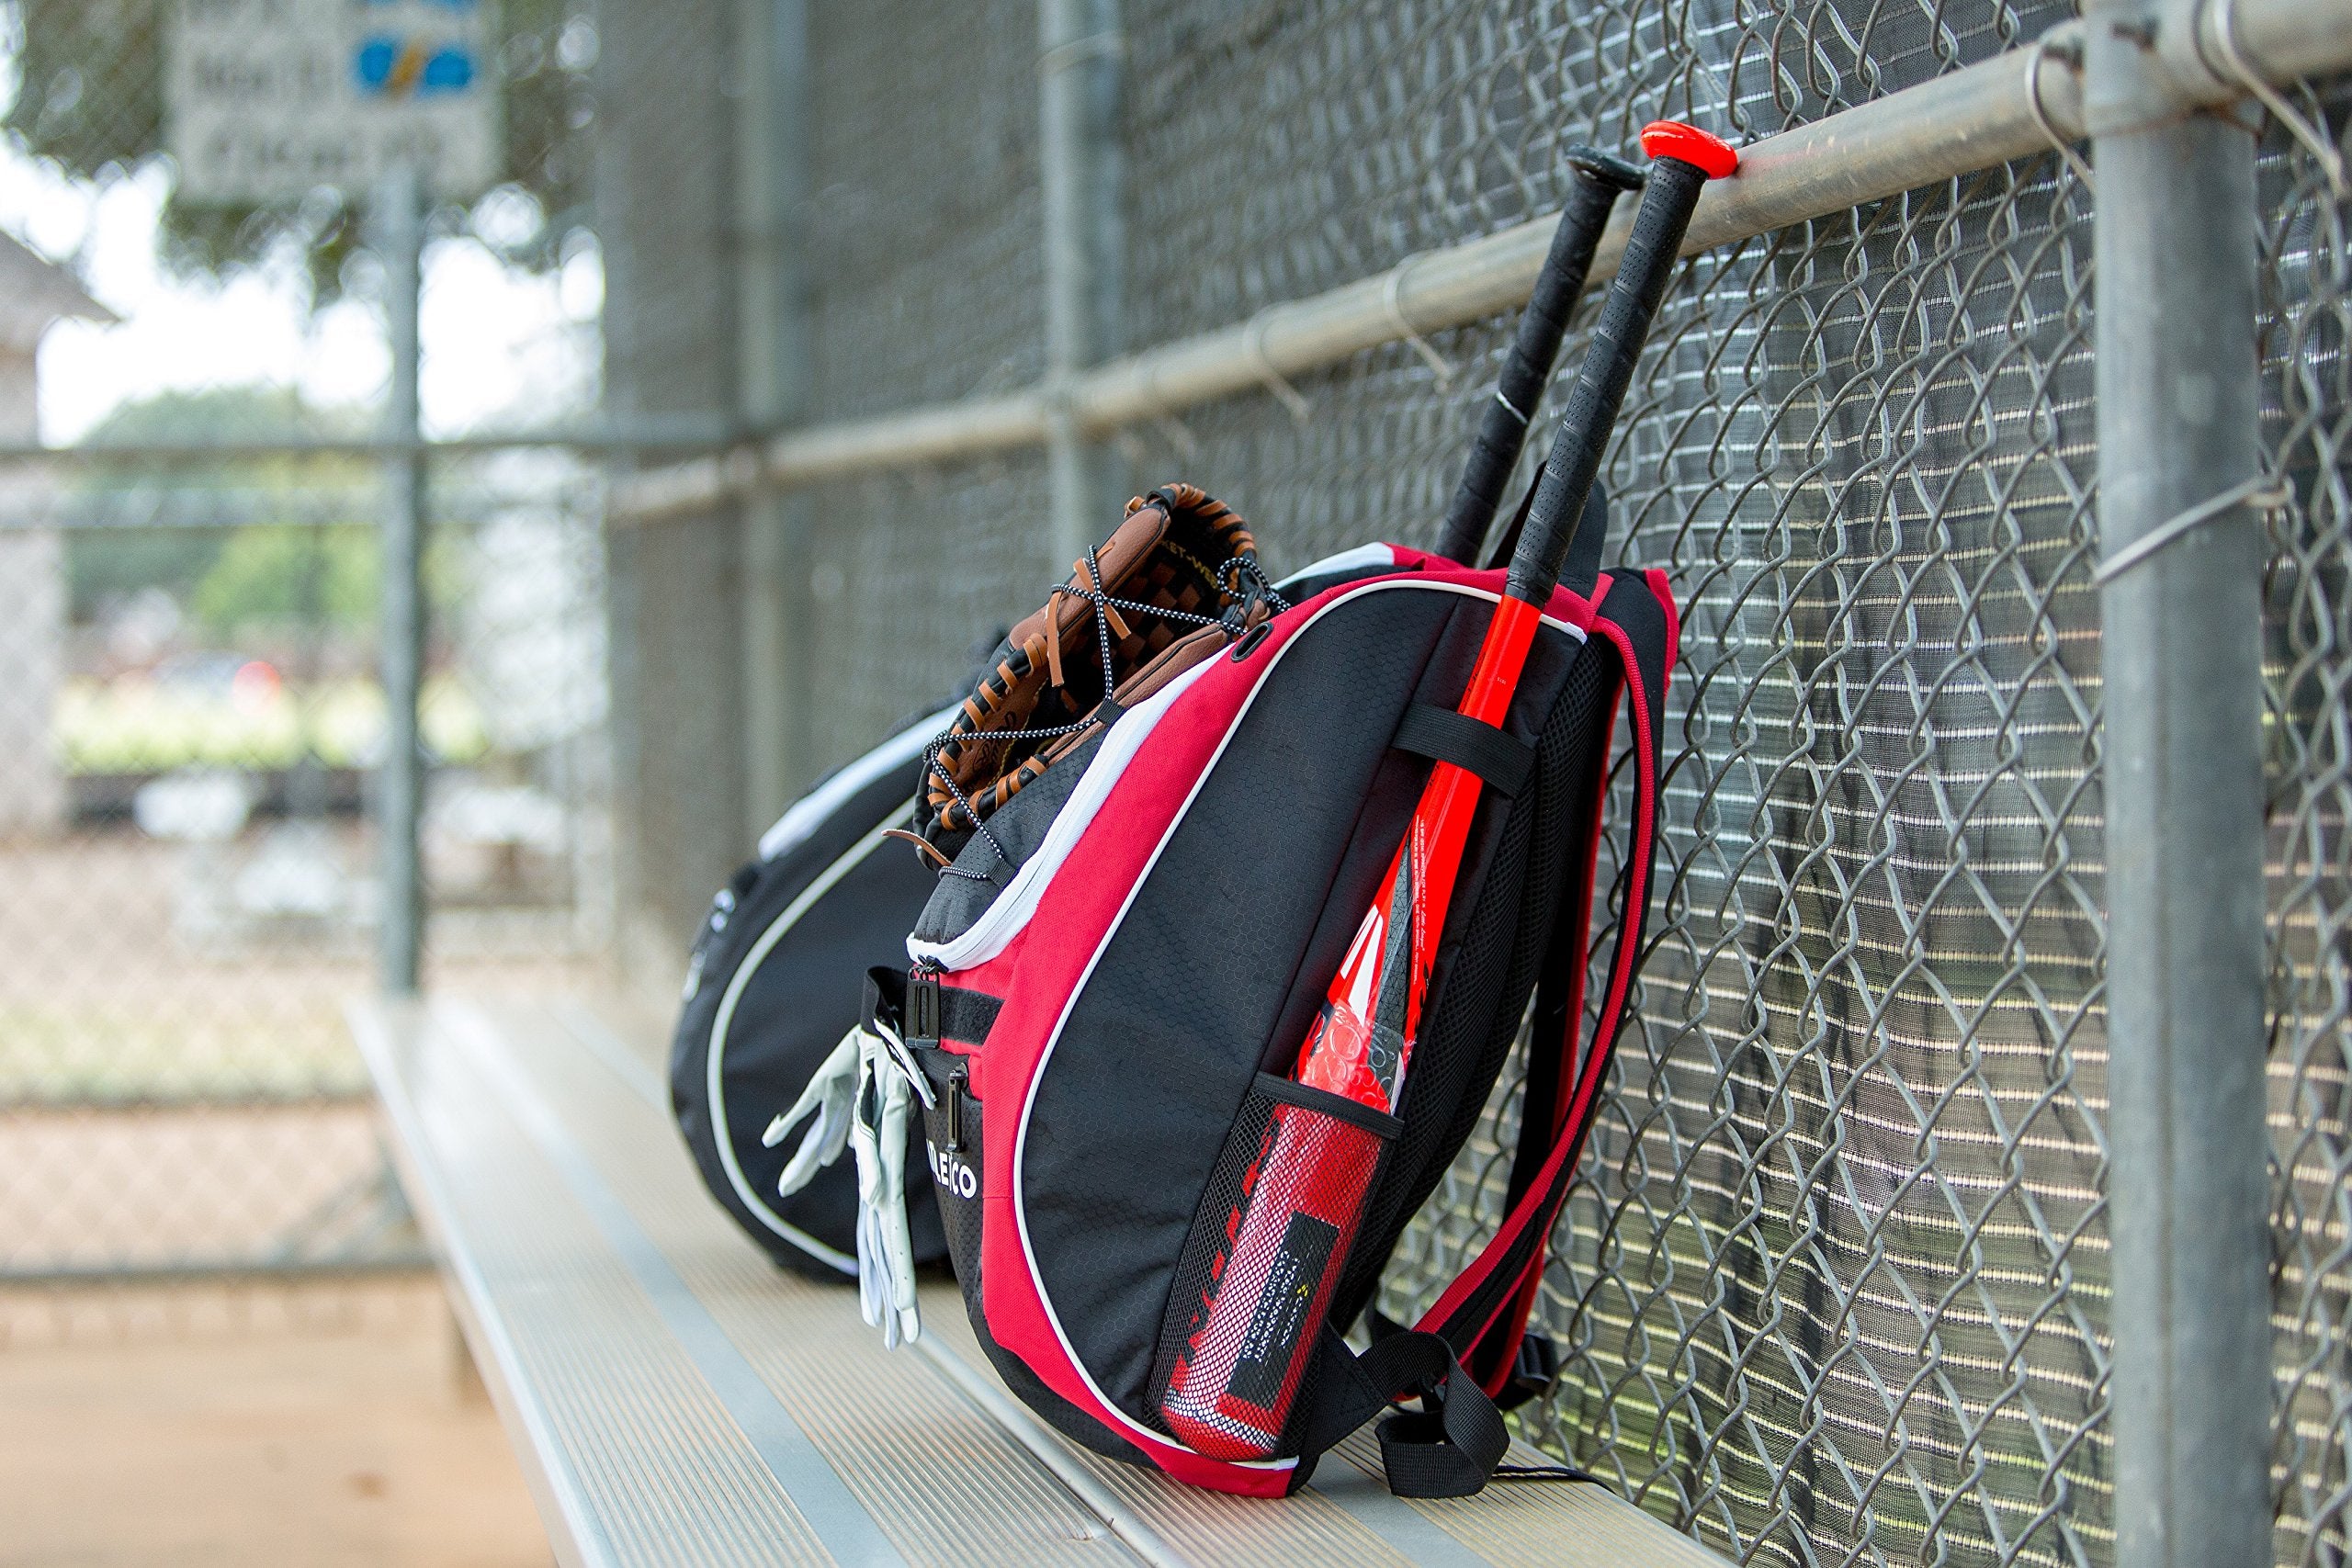 Athletico Baseball Bat Bag - Backpack for Baseball, T-Ball & Softball Equipment & Gear for Youth and Adults | Holds Bat, Helmet, Glove, & Shoes |Shoe Compartment & Fence Hook  - Like New